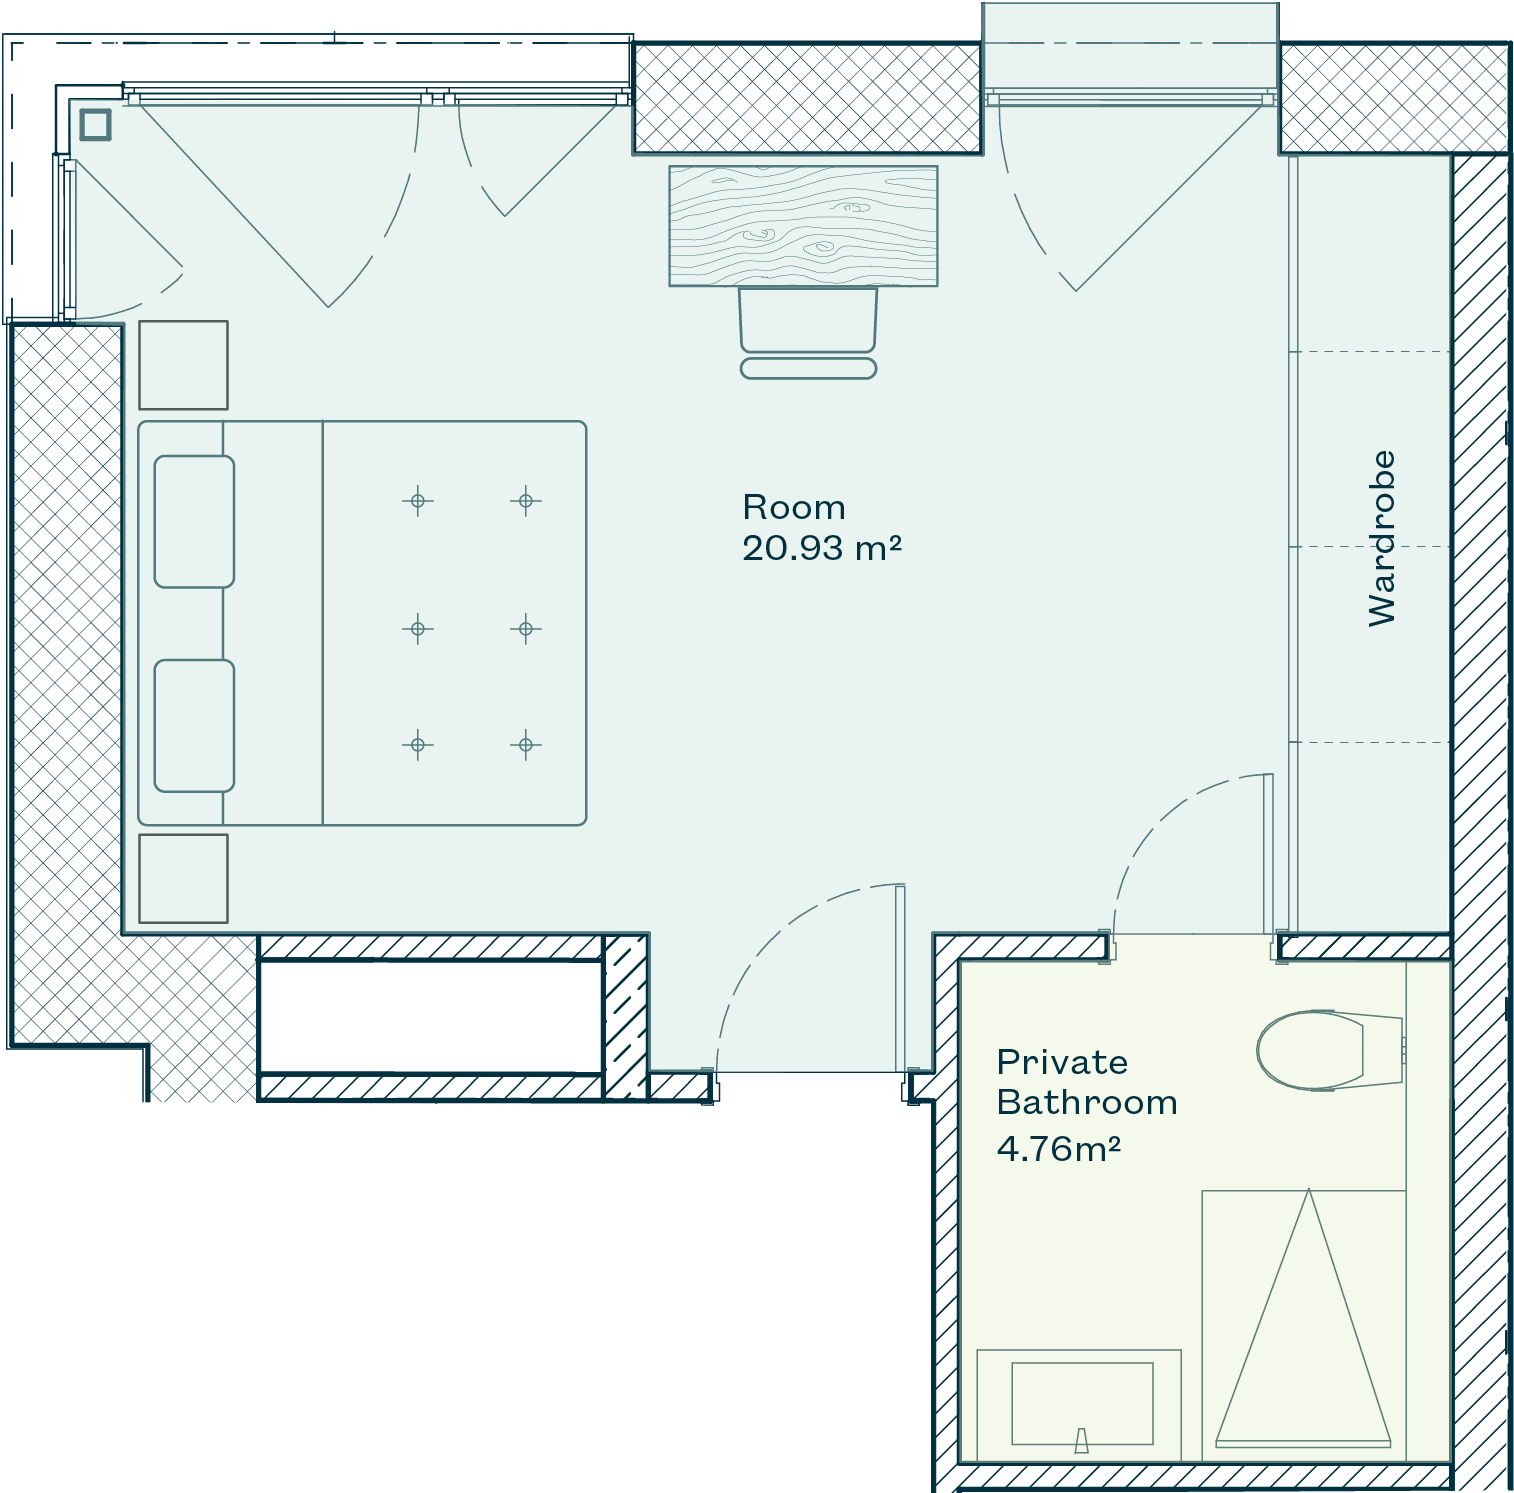 The floorplan showing the dimensions of a room with private ensuite bathroom within a shared house.